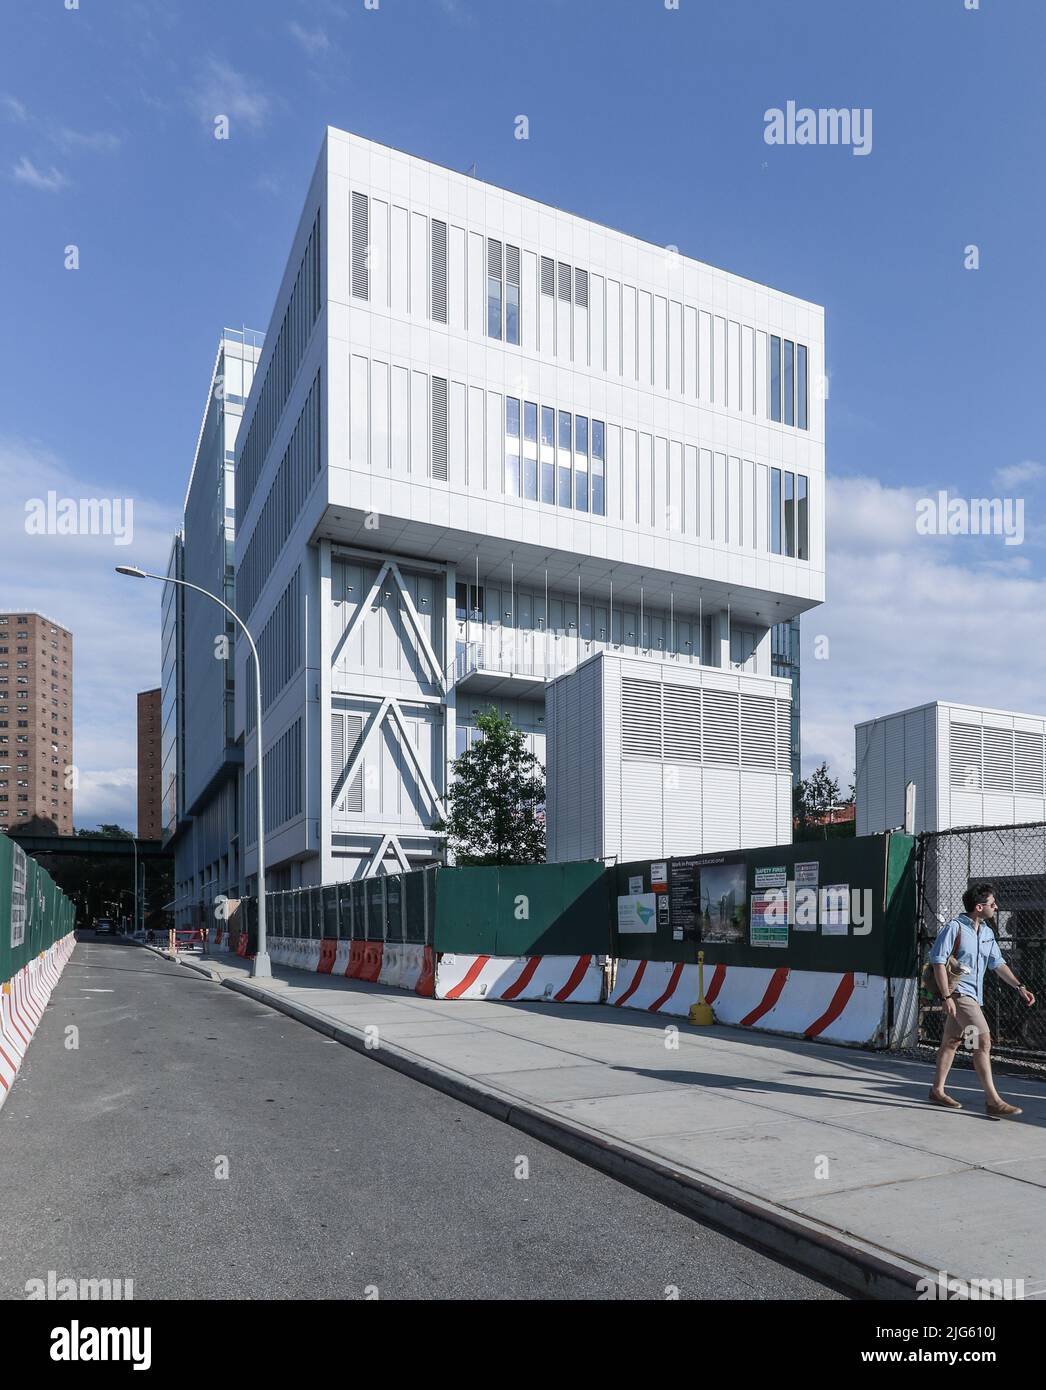 Columbia University Manhattanville Campus and Lenfest Center by Renzo Piano  Stock Photo - Alamy